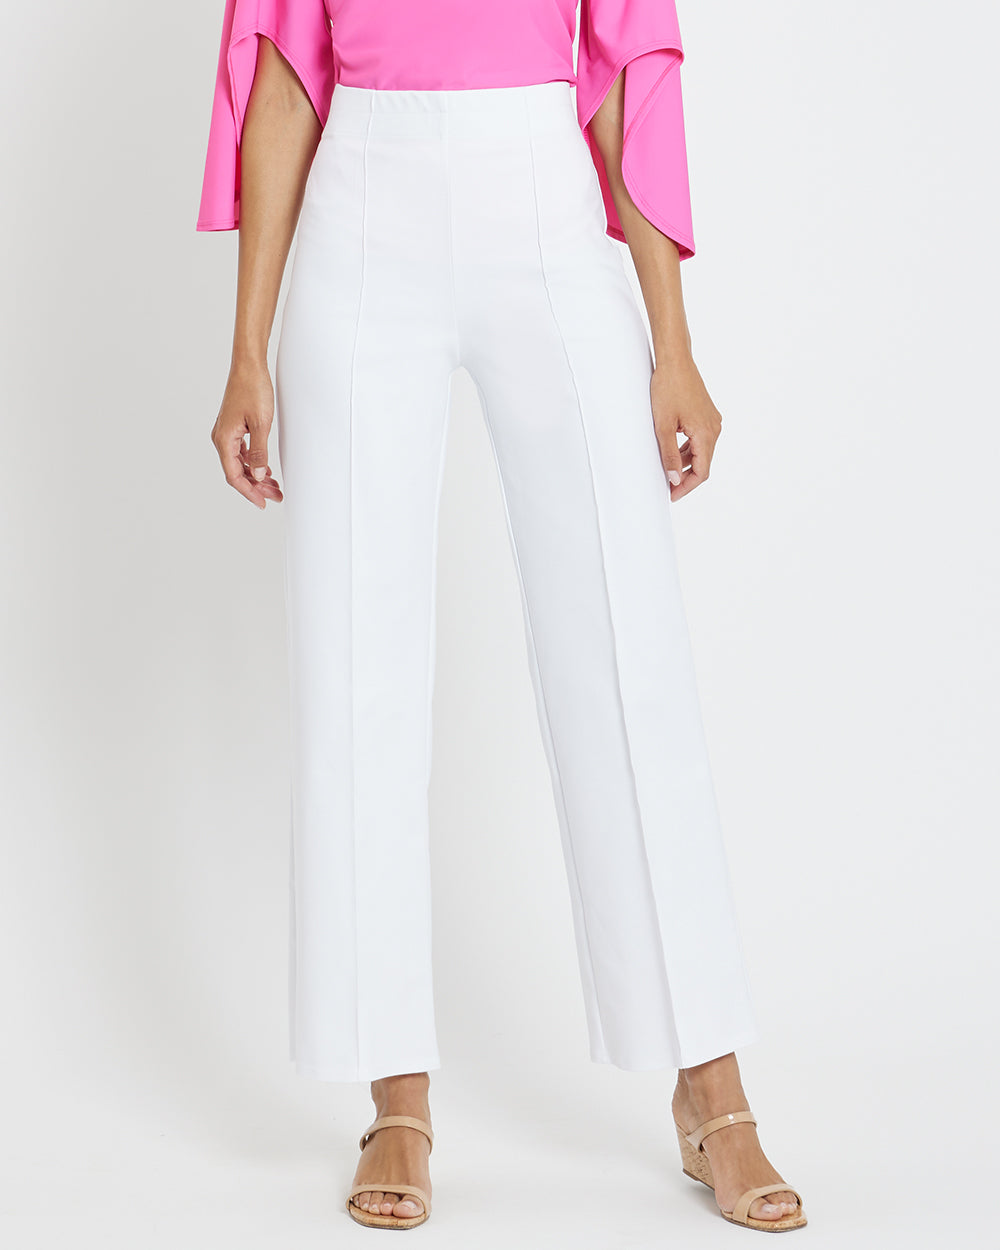 Felicia Pant - Cotton Stretch Sateen